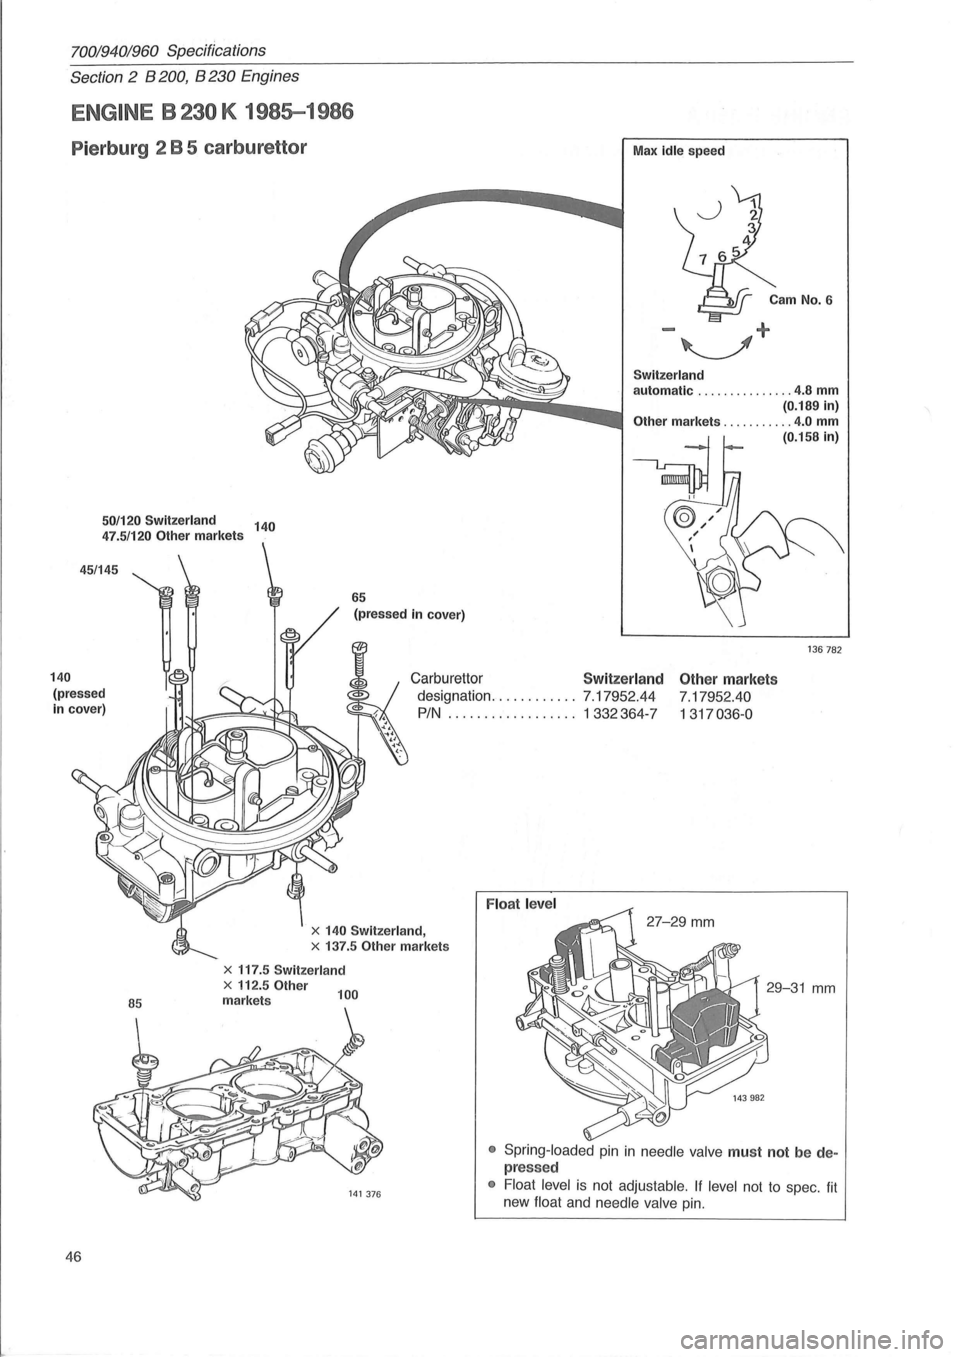 VOLVO 960 1982  Service Service Manual 70019401960 Specifications 
Section 2 B 200, B 230 Engines 
ENGINE B 230 K 1985-1986 
Pierburg  2 B 5 carburettor Max idle speed 
Cam No.6 
- + 
~ 
Switzerland automatic ............... 4.8 mm (0.189 